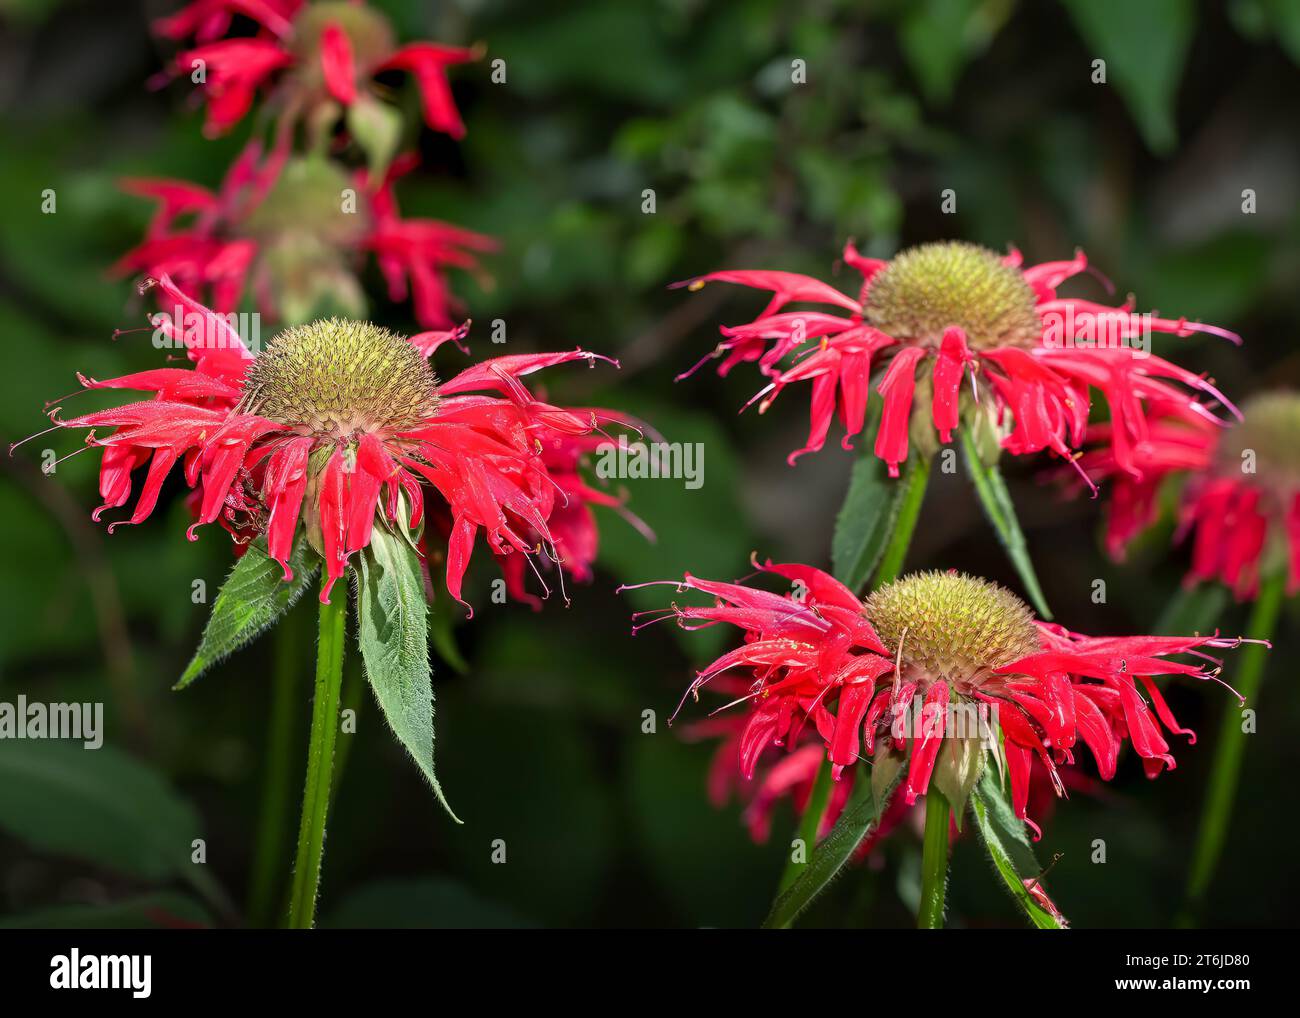 Close up Scarlet Beebalm (Monarda didyma L.) scarlet red blossoms growing in the Chippewa National Forest, northern Minnesota USA Stock Photo